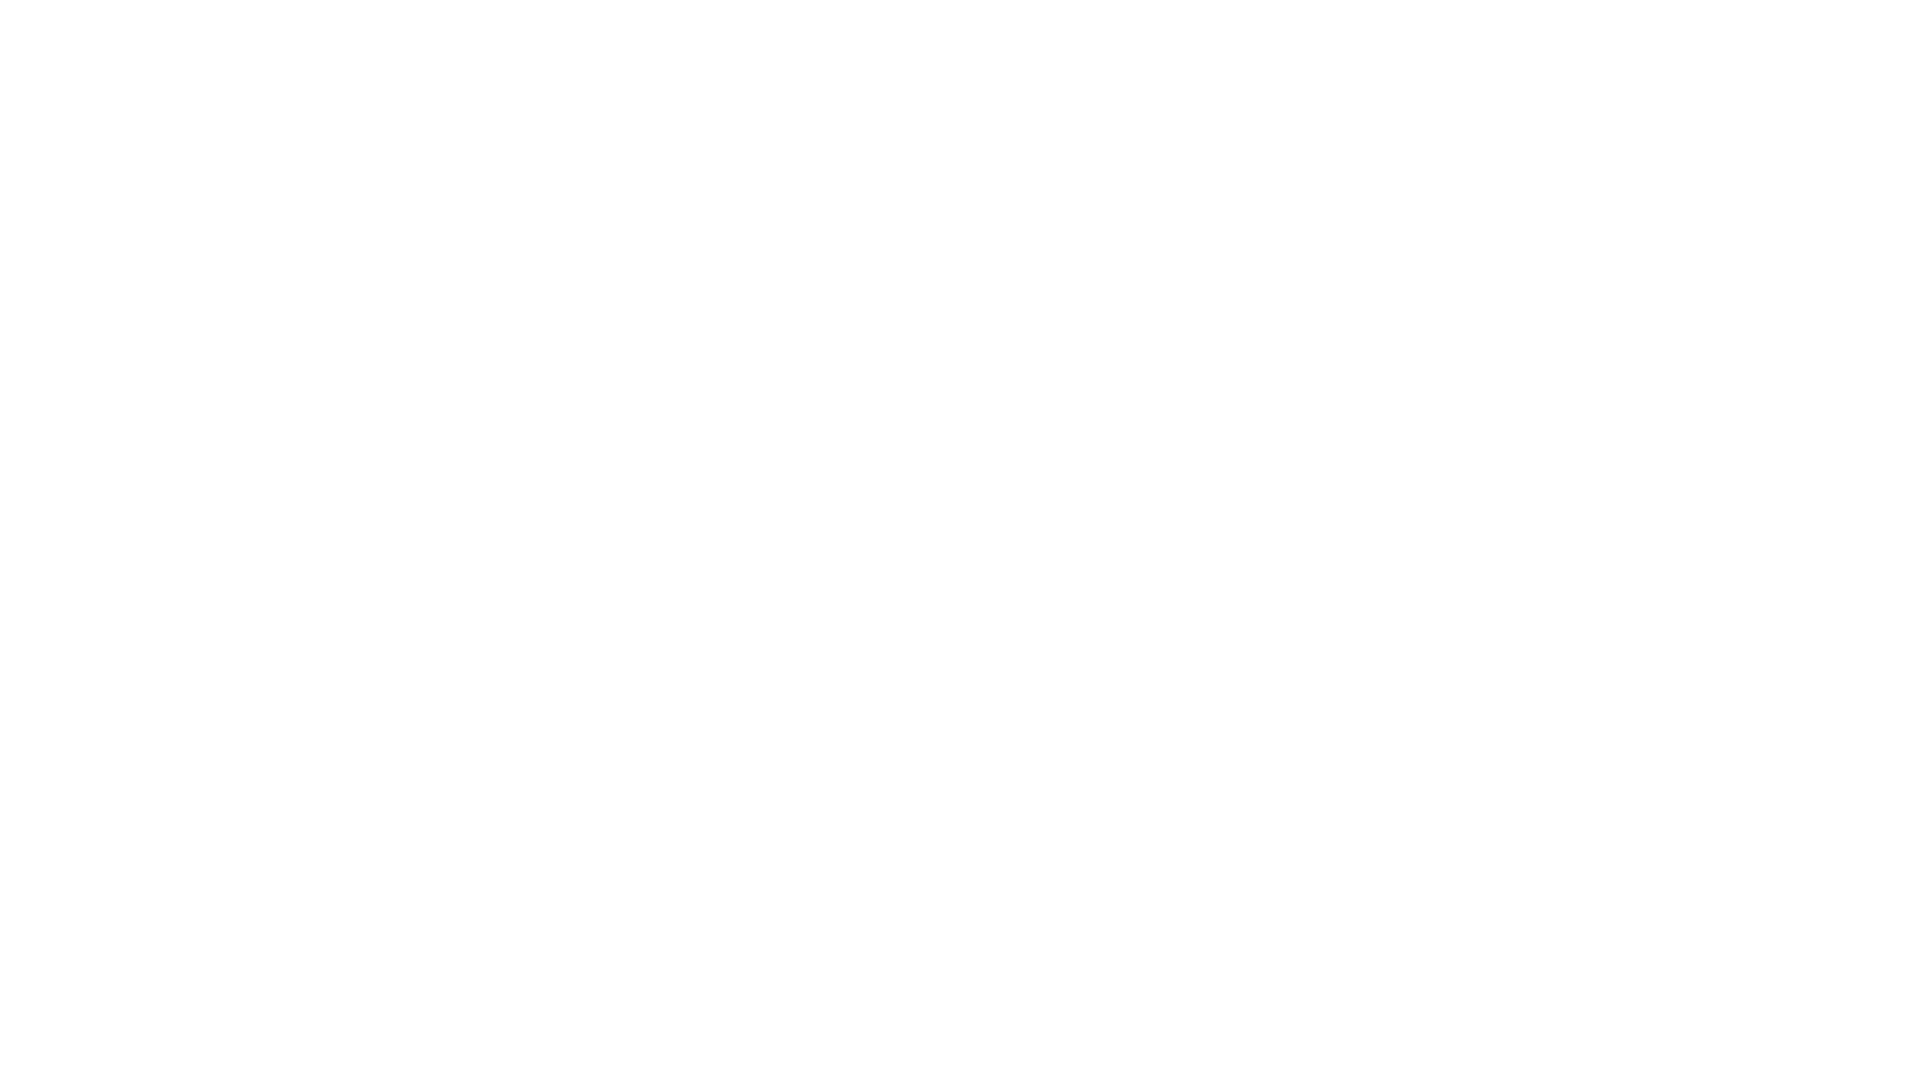 Tape me up